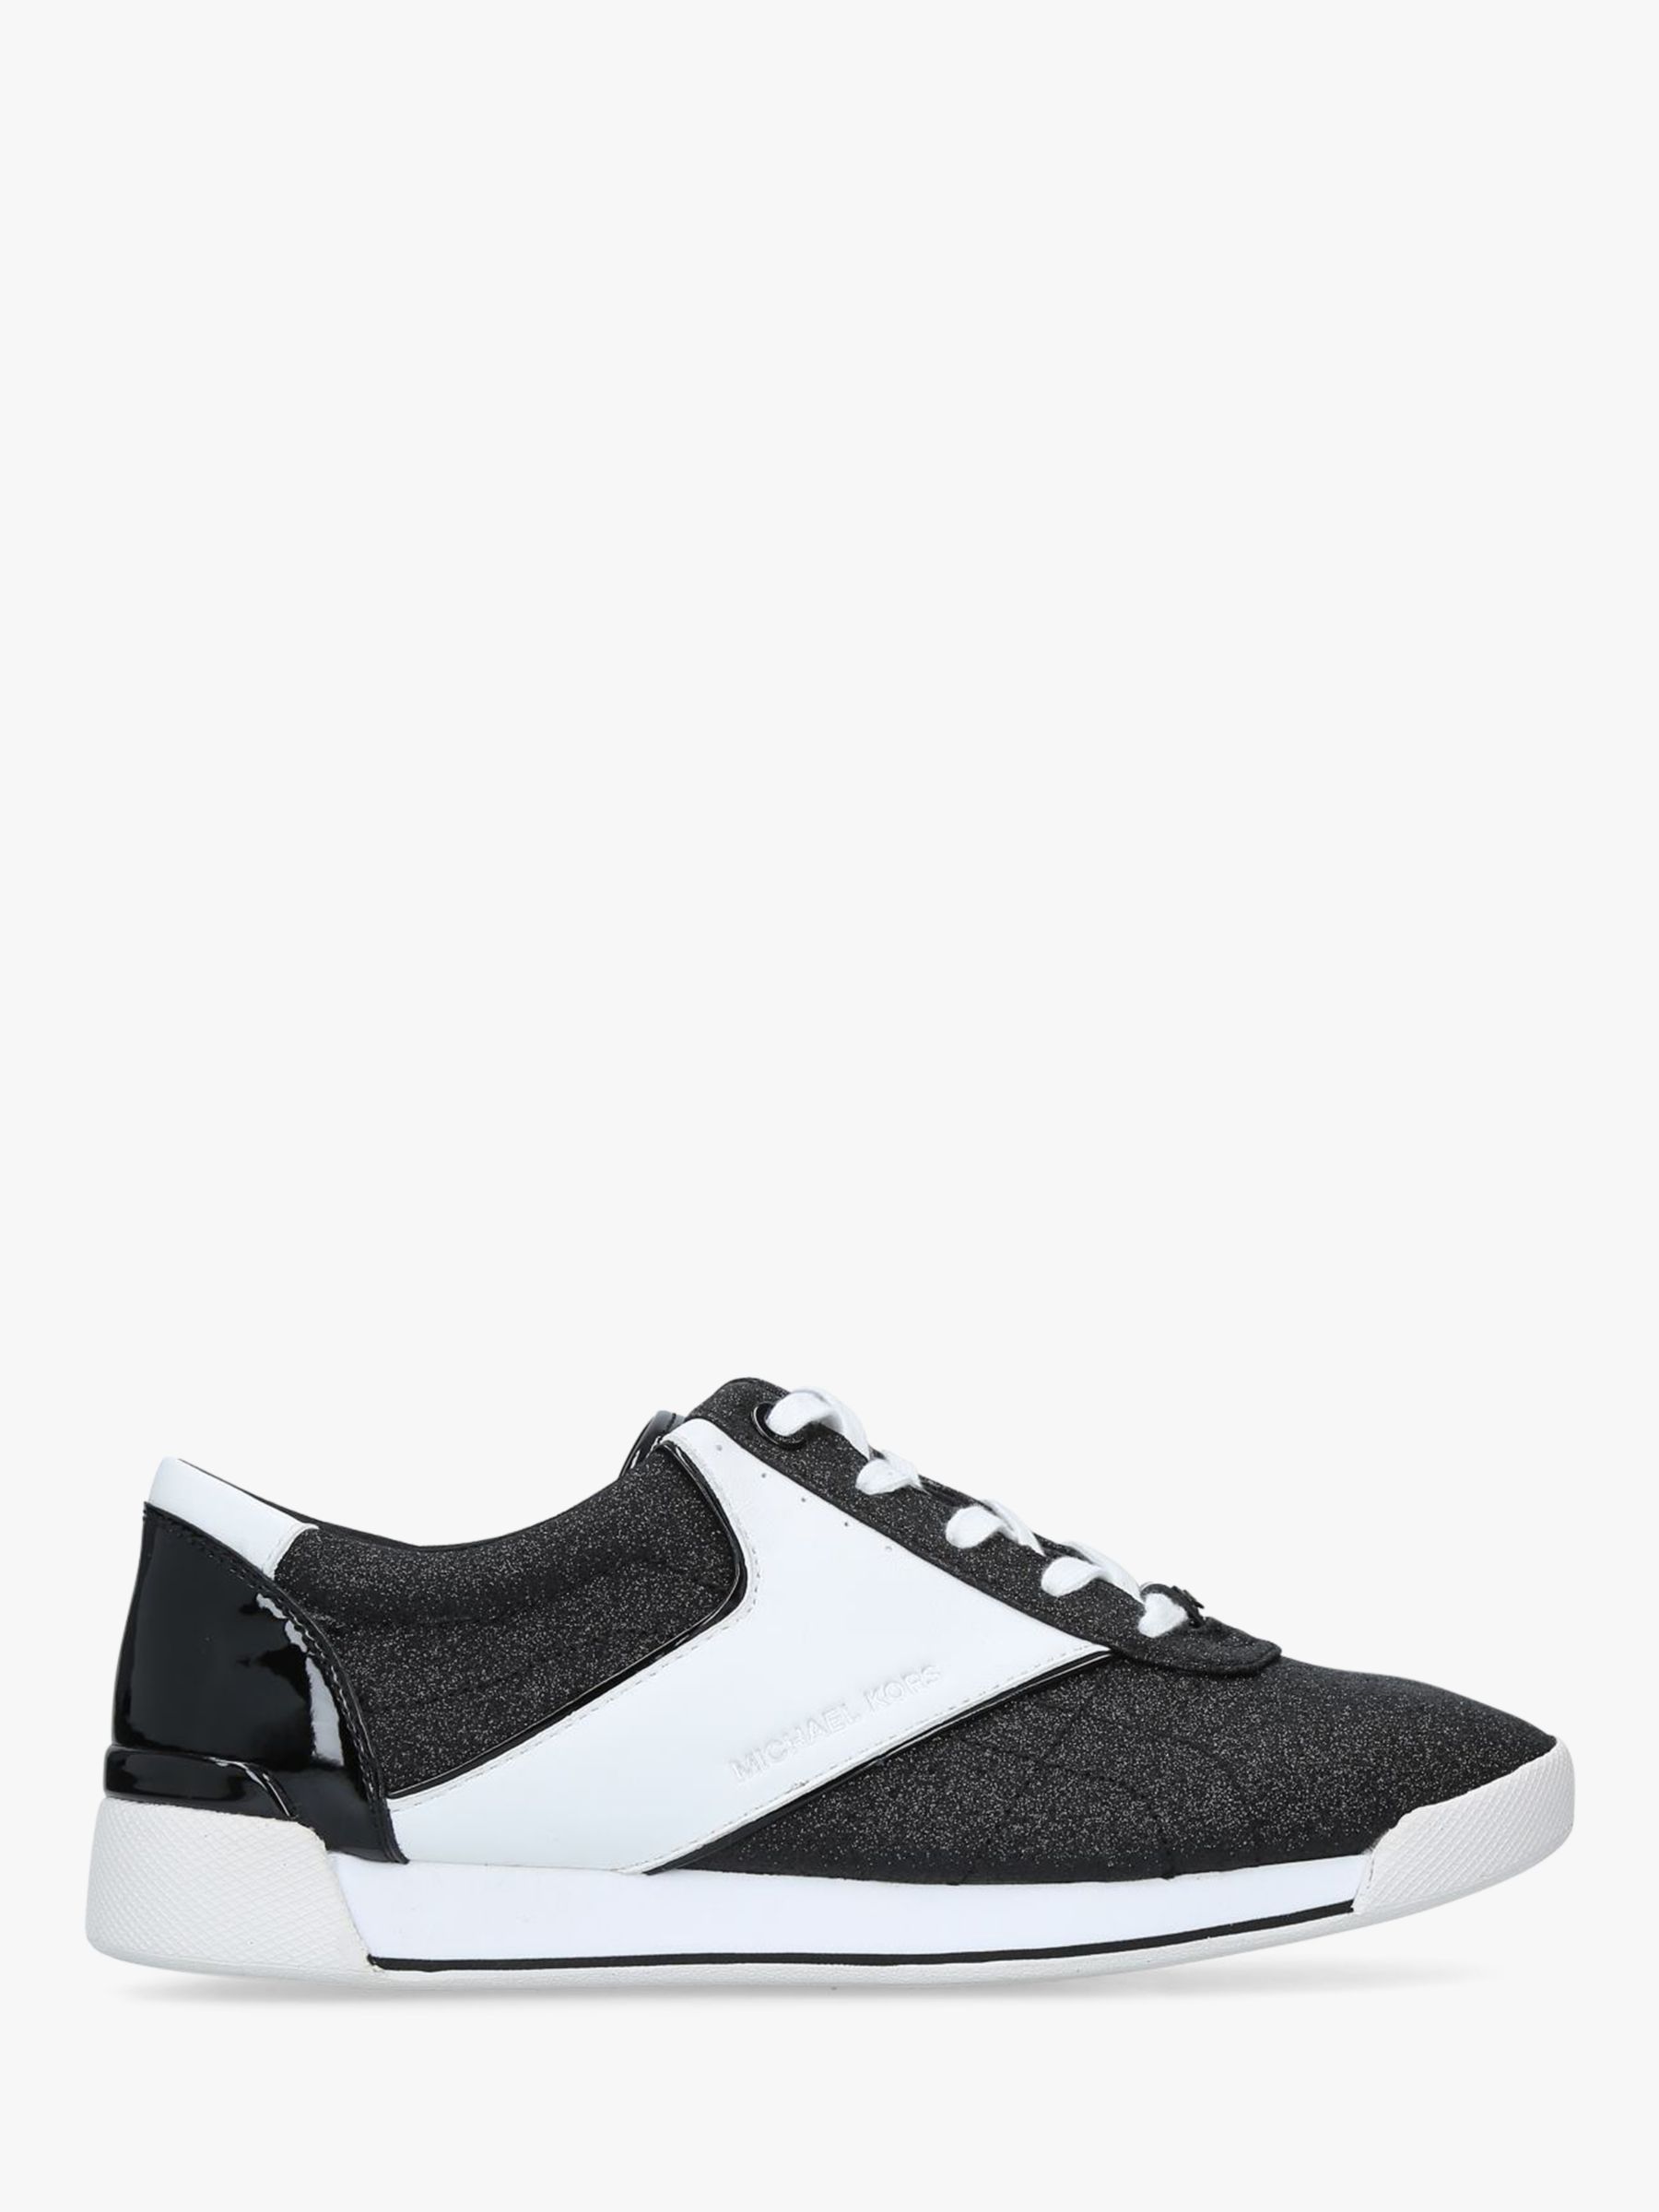 MICHAEL Michael Kors Addie Lace Up Trainers